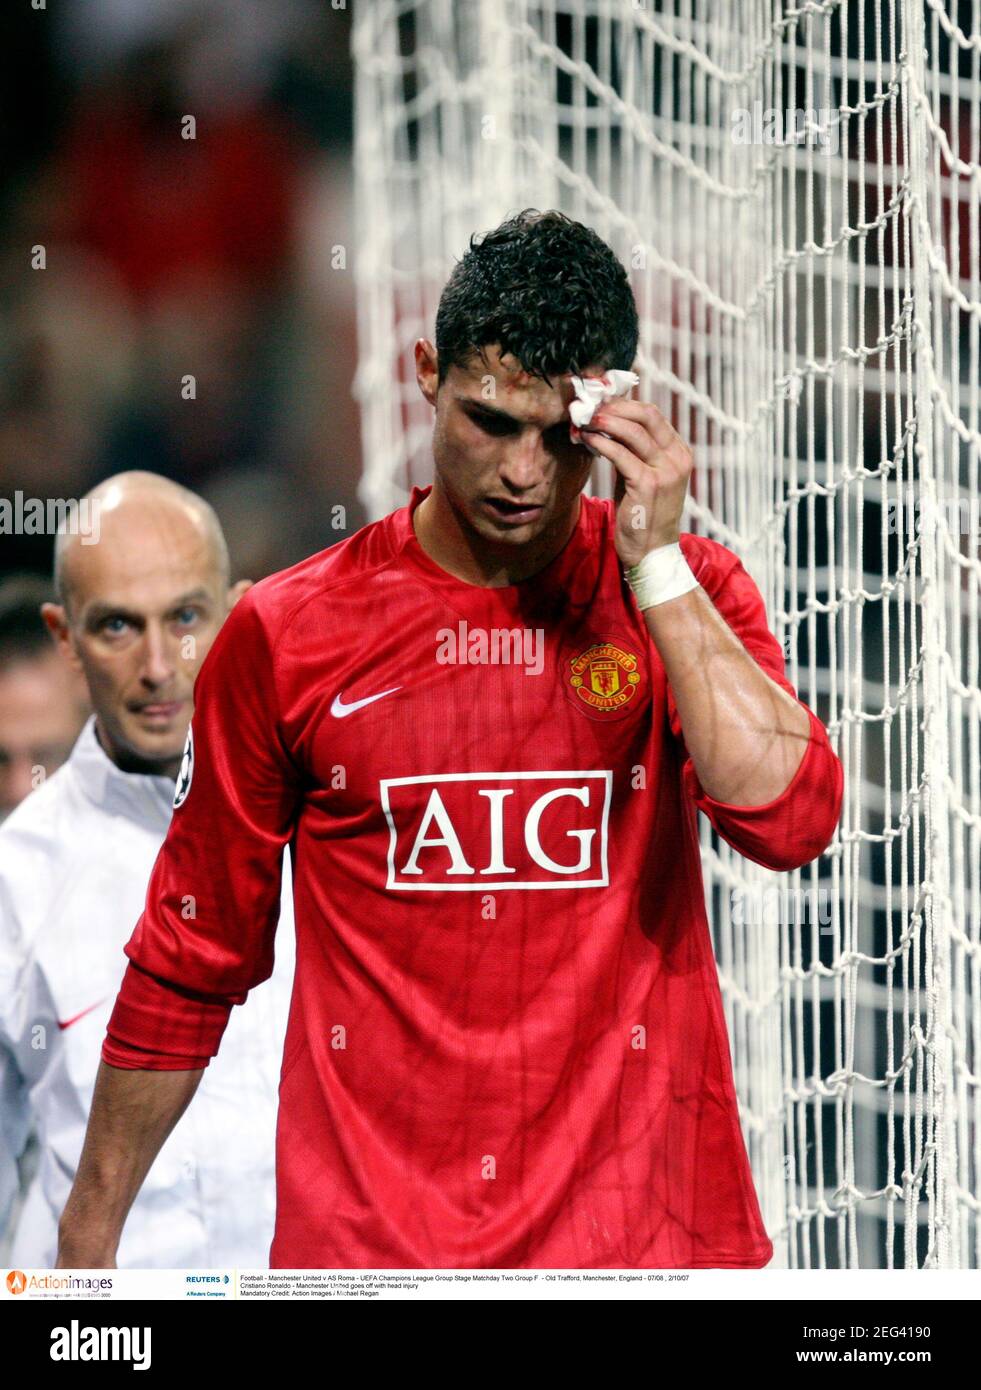 Football - Manchester United v AS Roma - UEFA Champions League Group Stage  Matchday Two Group F - Old Trafford, Manchester, England - 07/08 , 2/10/07  Cristiano Ronaldo - Manchester United goes